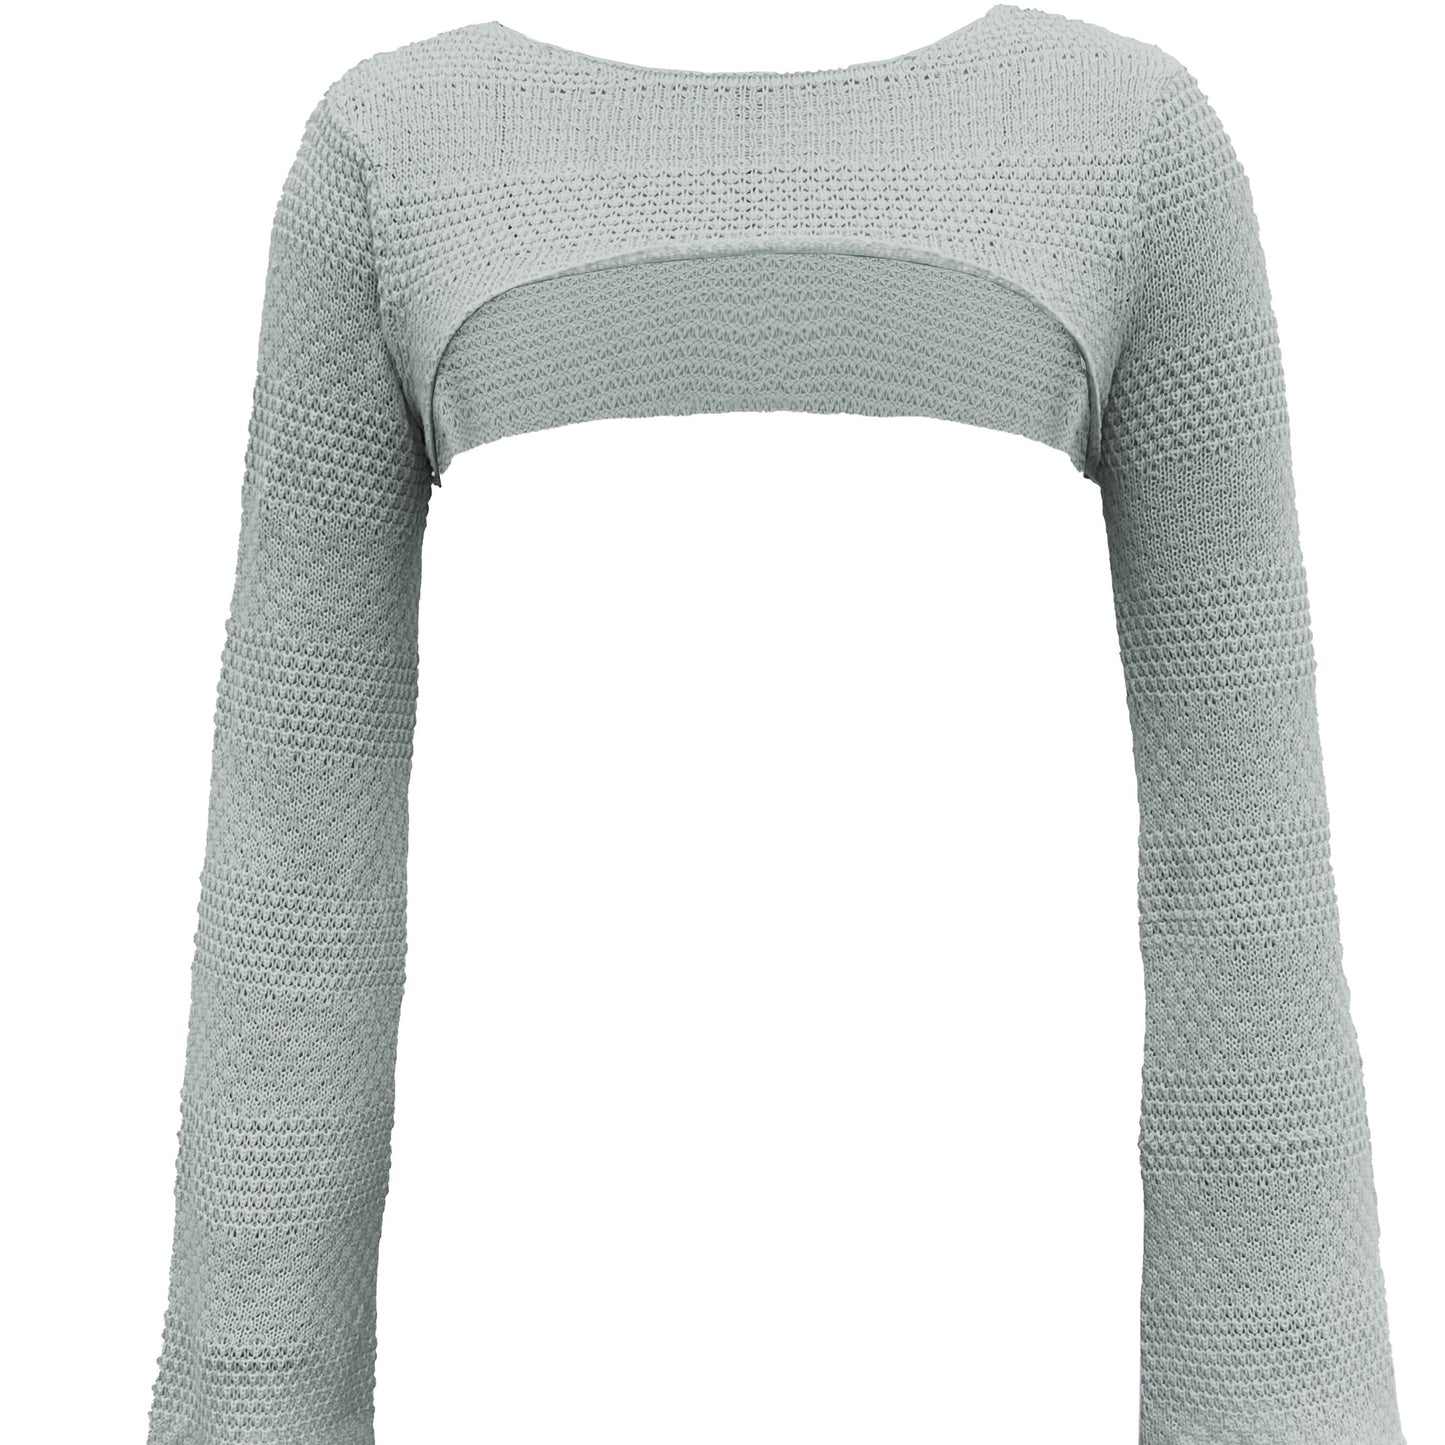 Antmvs Vacation Crop Knitted Sweater, Long Sleeve Casual Sweater For Spring & Summer, Women's Clothing